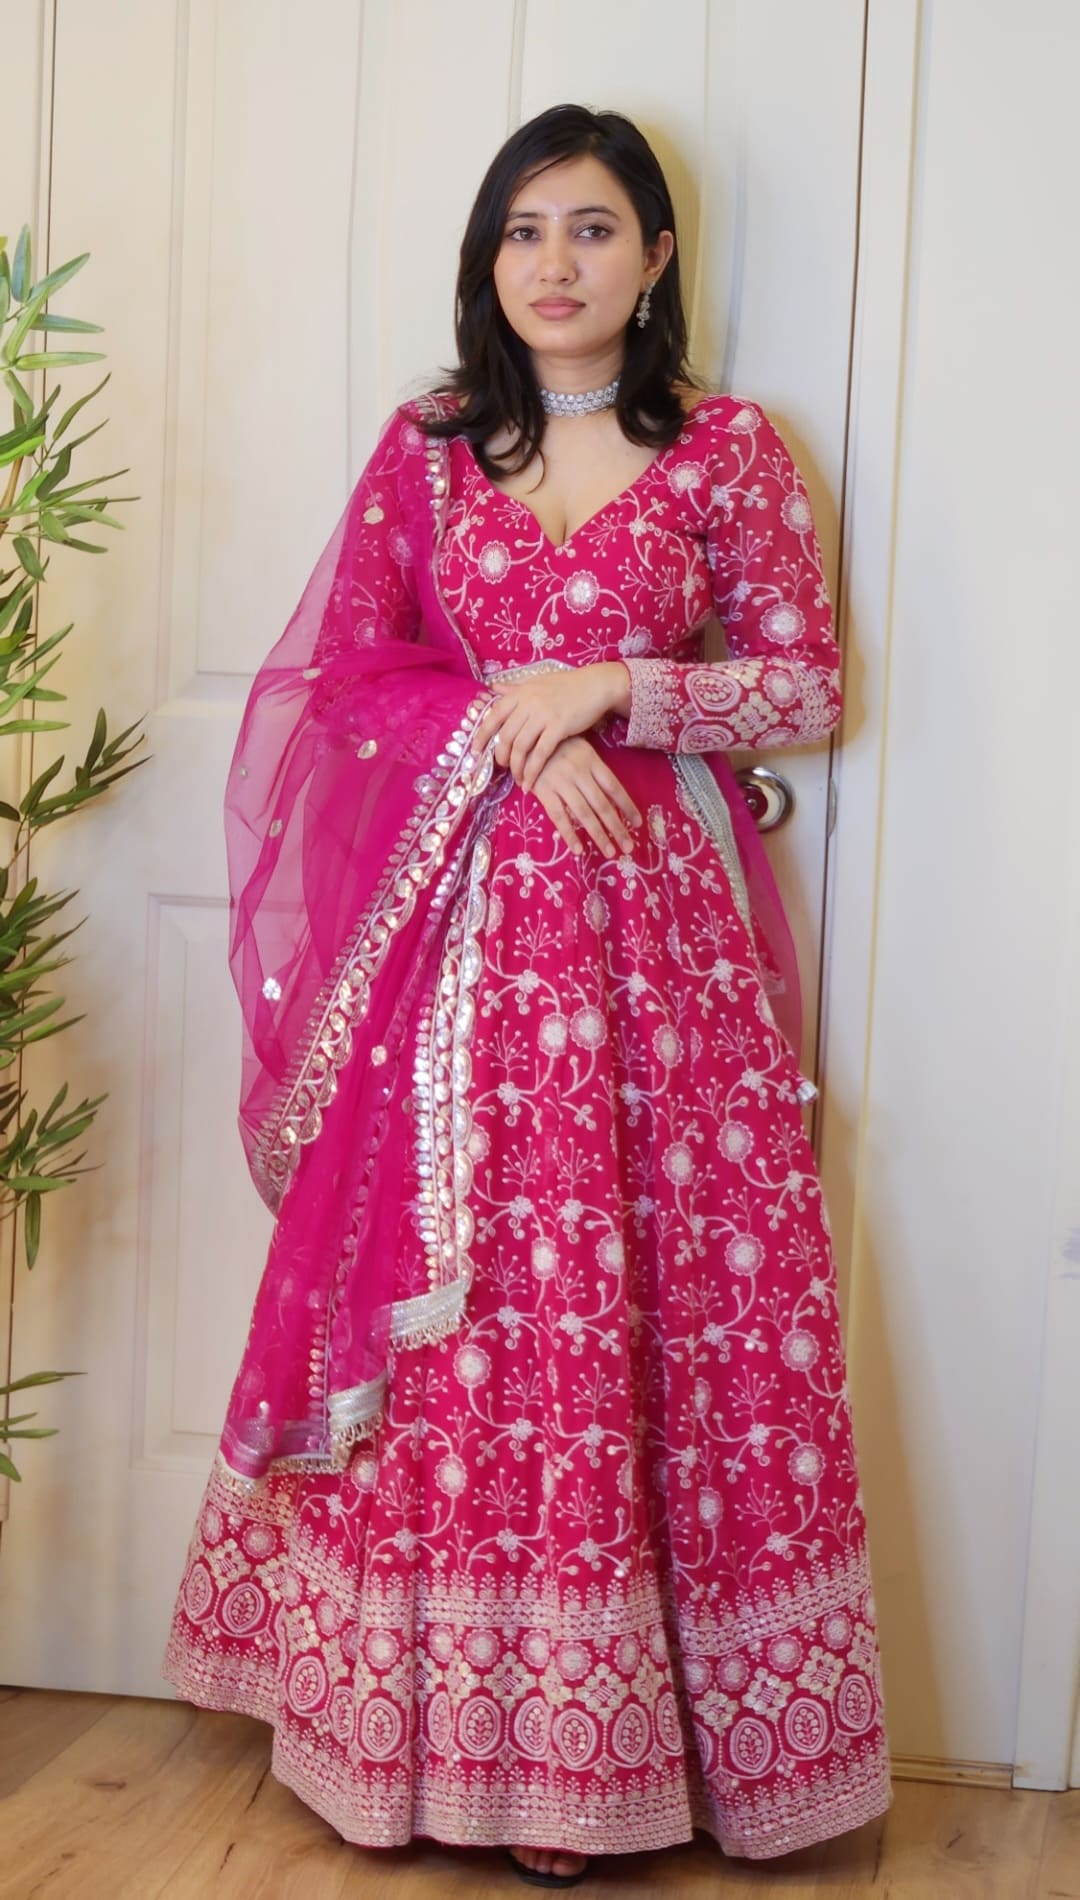 Hot Pink Sequin and Thread Embroidered Lehenga with Full Sleeve Blouse and Shawl Mimosa